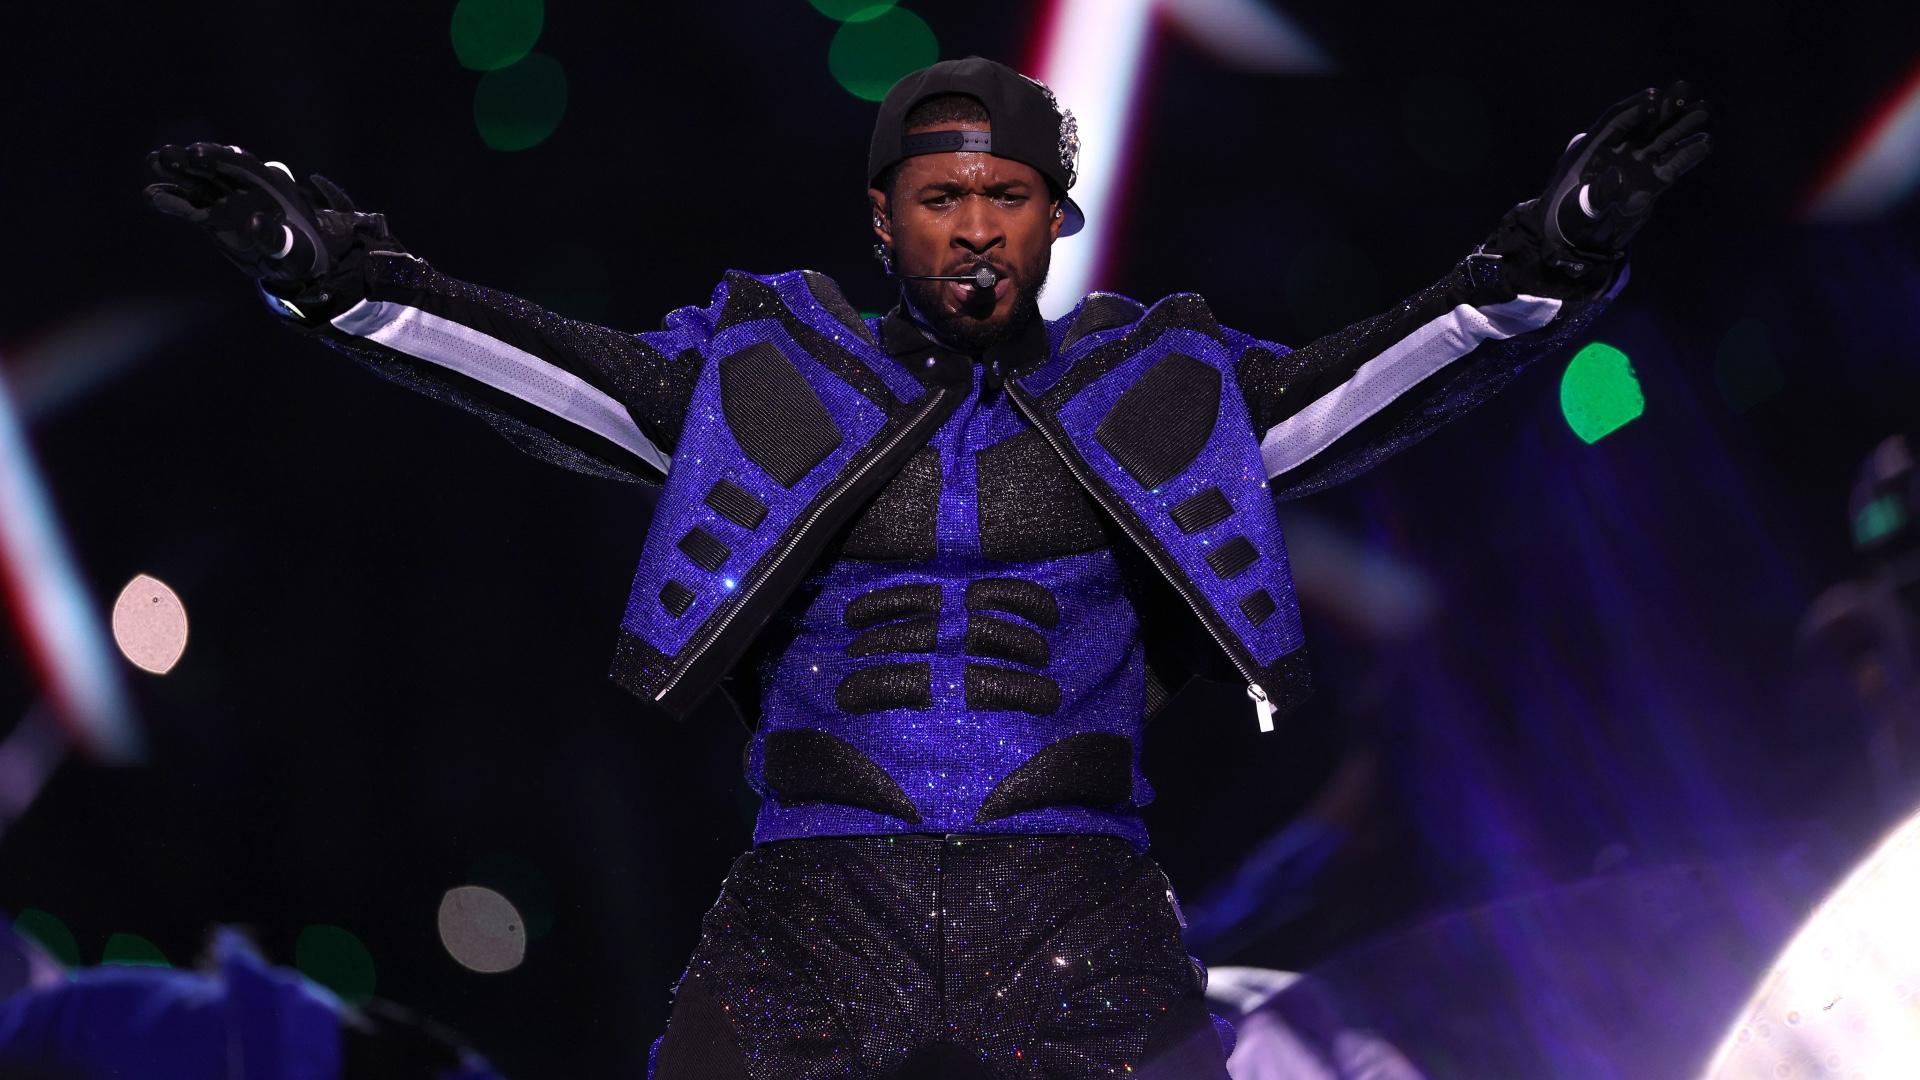 Usher’s Super Bowl halftime show performance brought skates, famous friends and a Vegas vibe